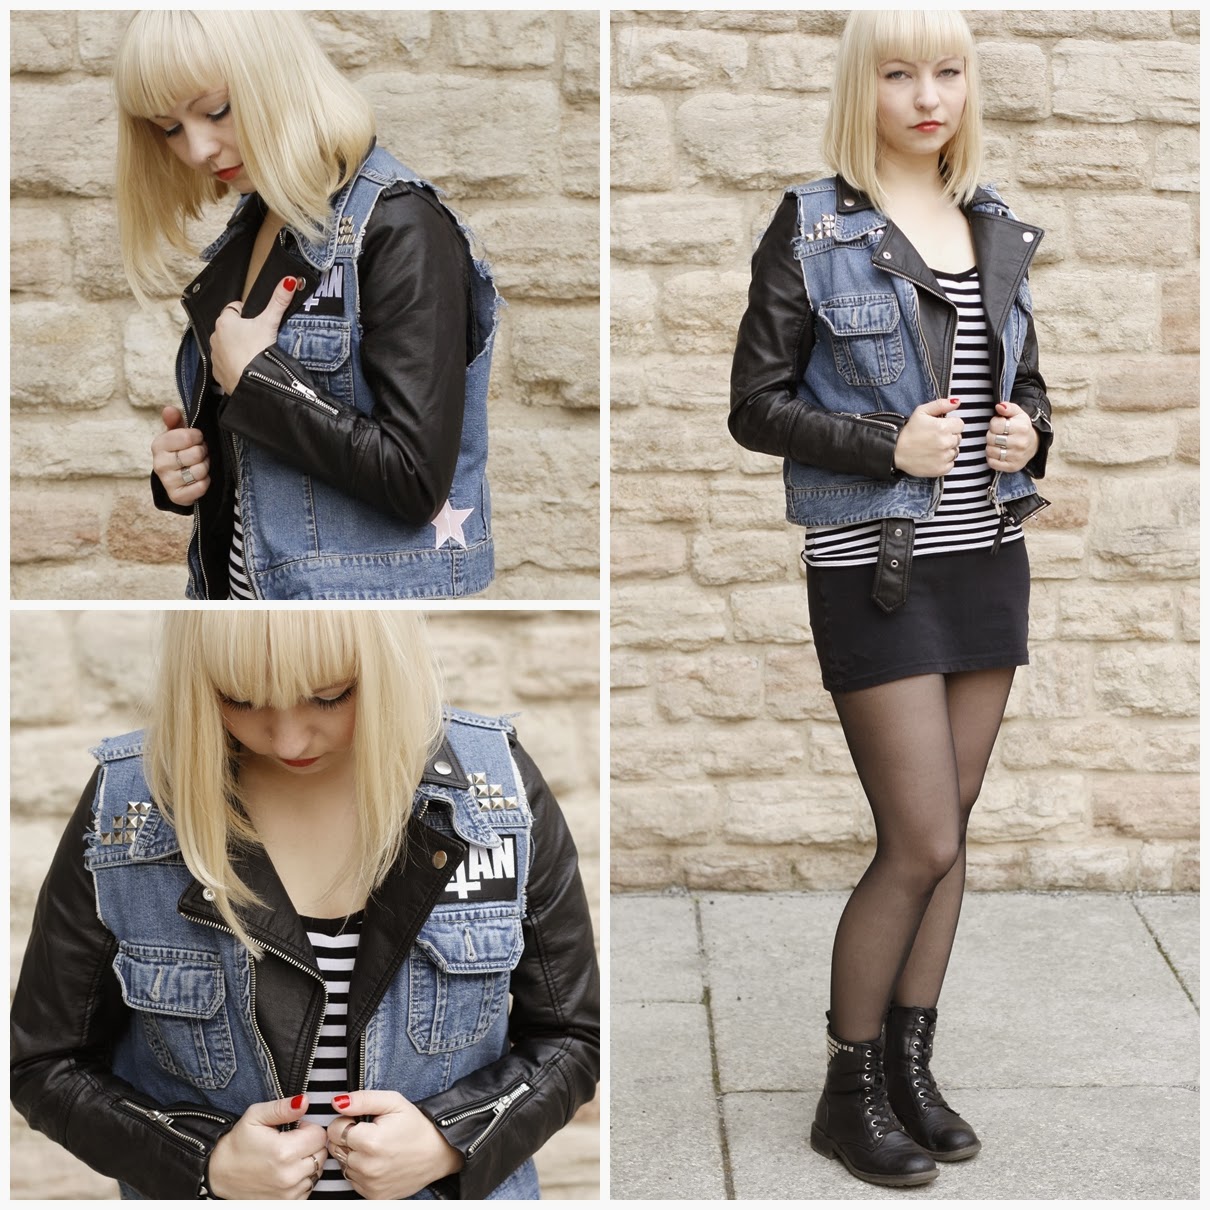 Top 10 Alternative Fashion Must Have's - Part I: The Leather Jacket ...